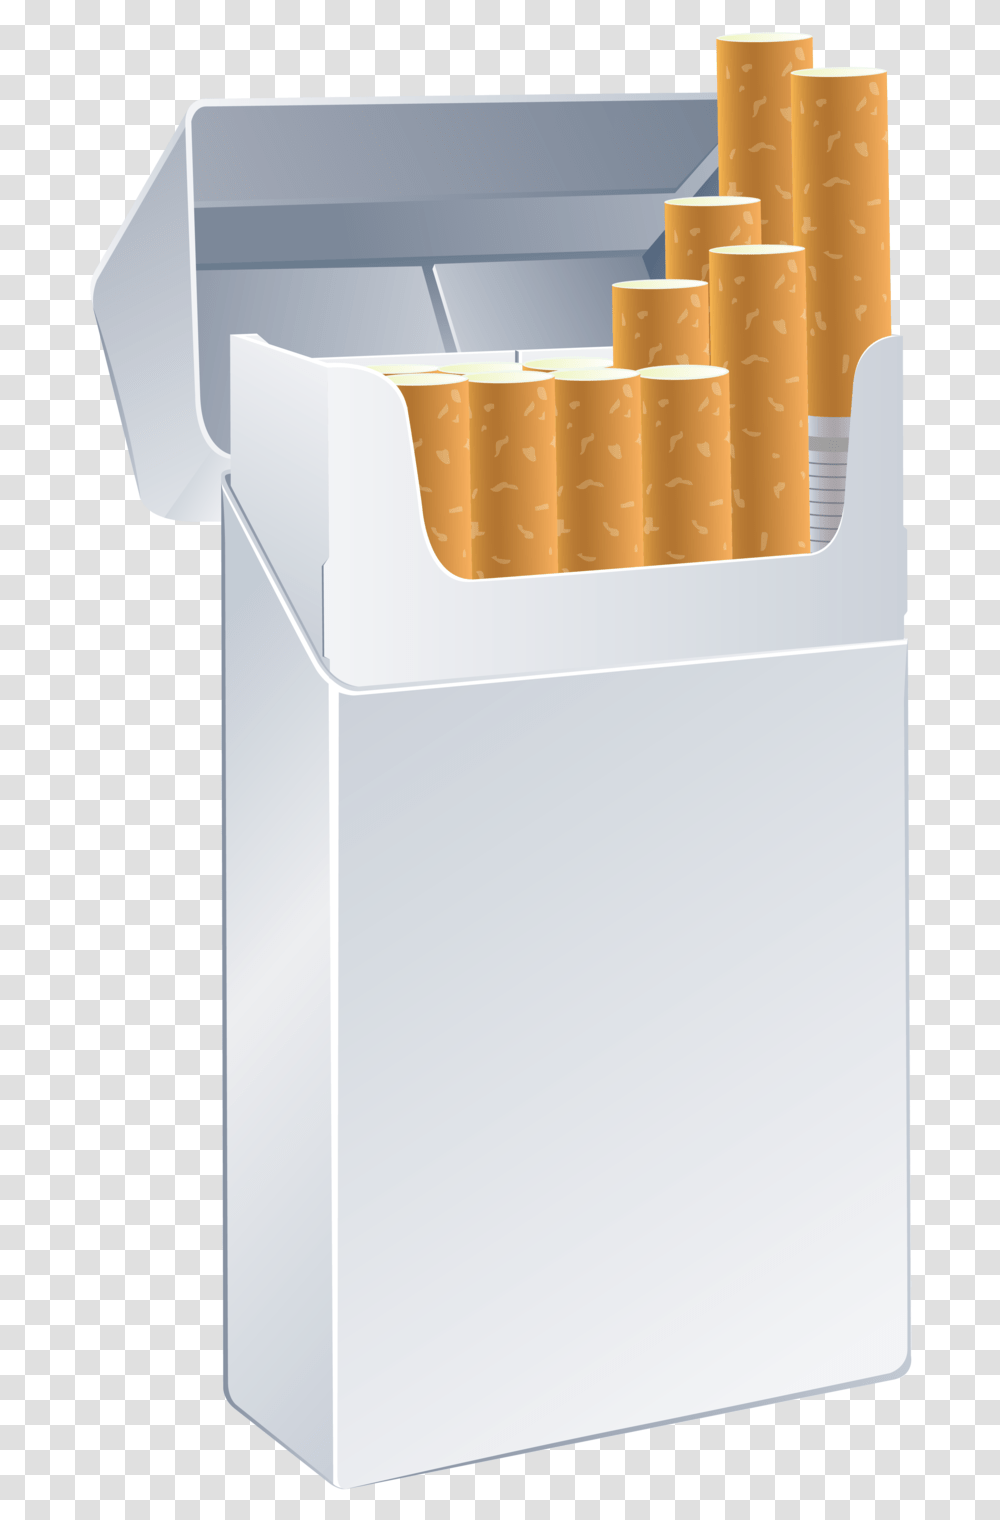 Cigarette Box Template Clipart Clipart Image Pack Of Cigarettes, Bread, Food, Appliance, Toast Transparent Png